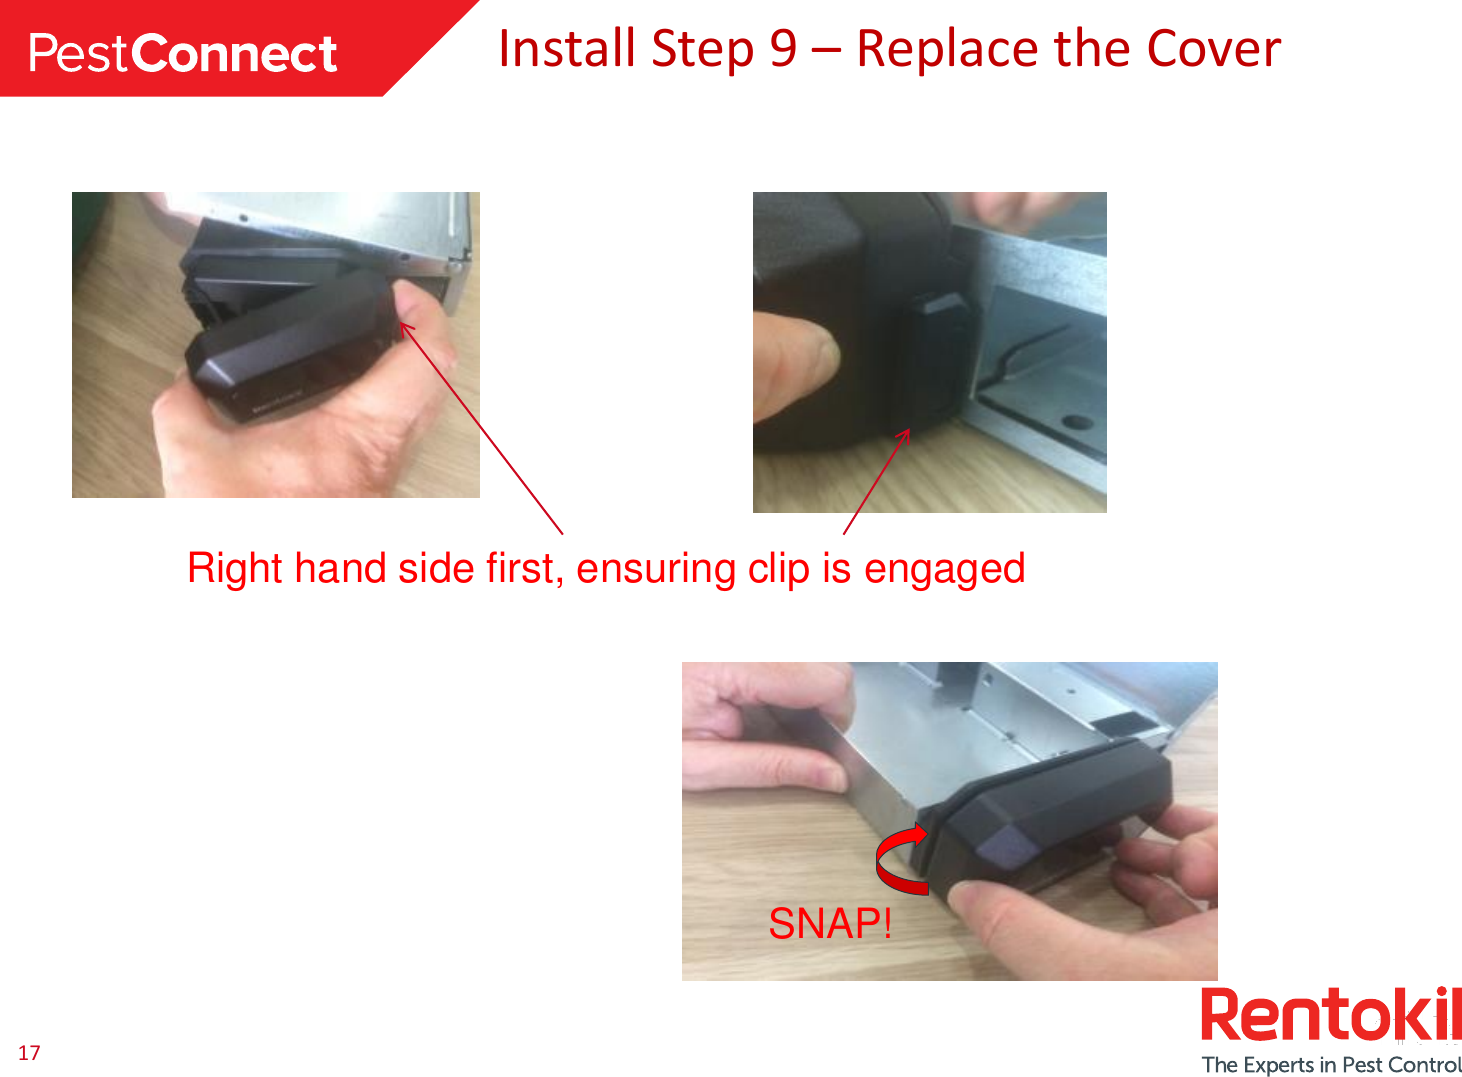 17Install Step 9 –Replace the CoverRight hand side first, ensuring clip is engagedSNAP!